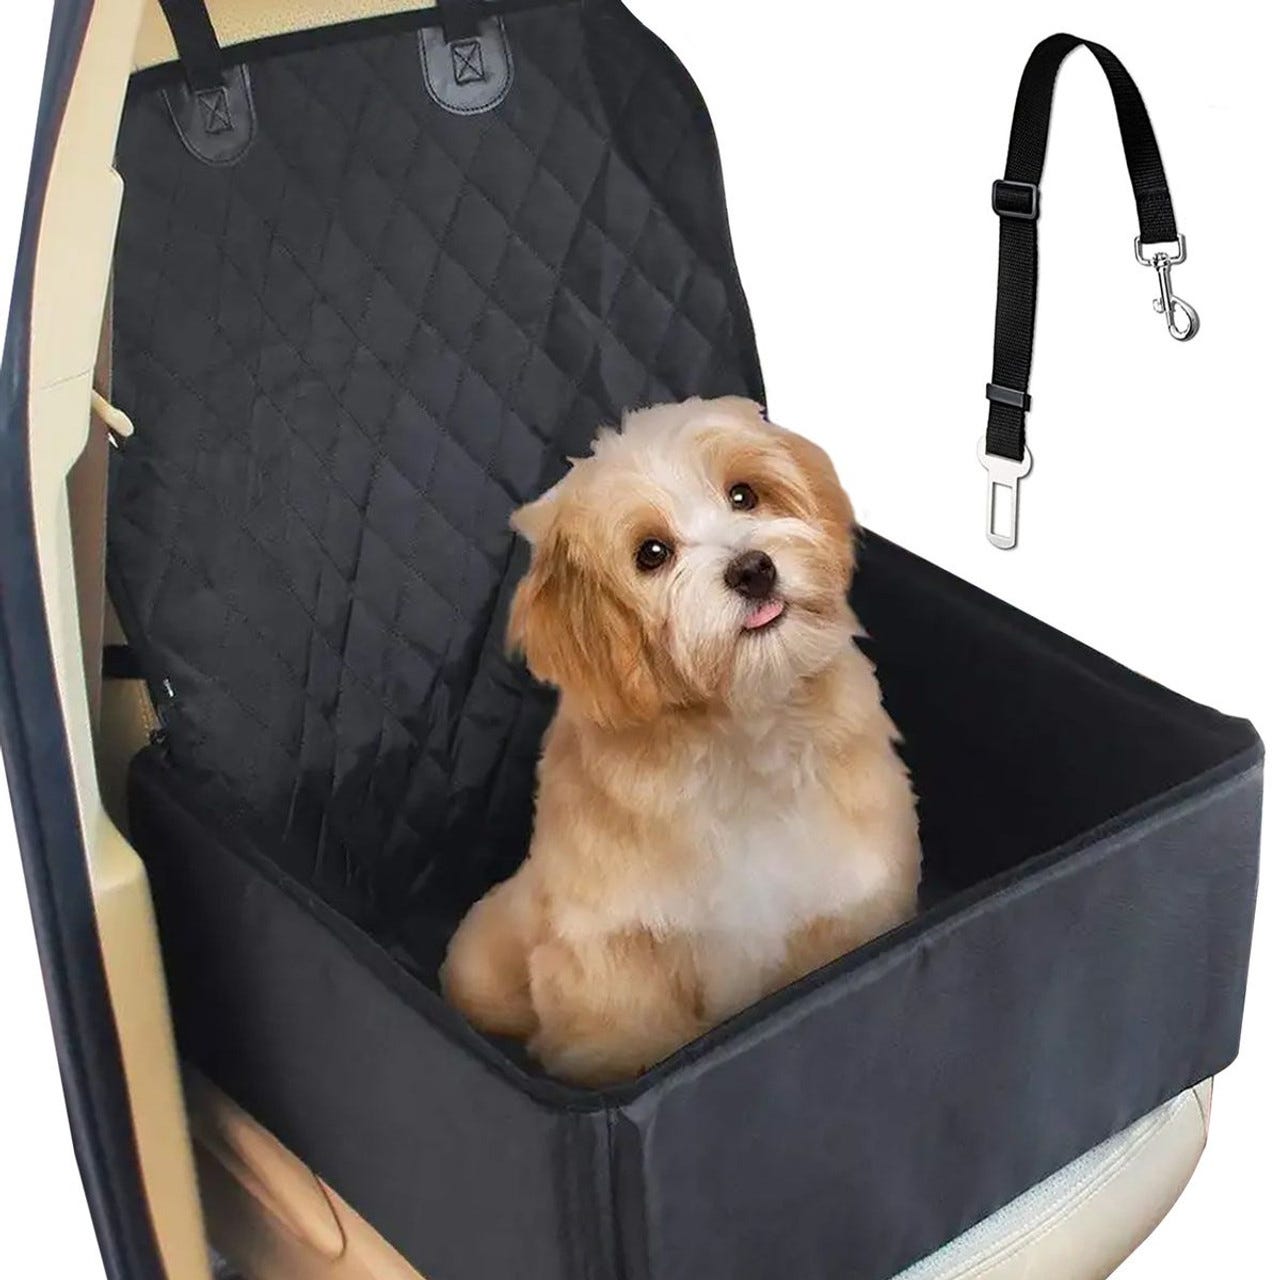 A dog is sitting in a black quilted car seat cover designed for pets, with an adjustable safety leash included to one side.